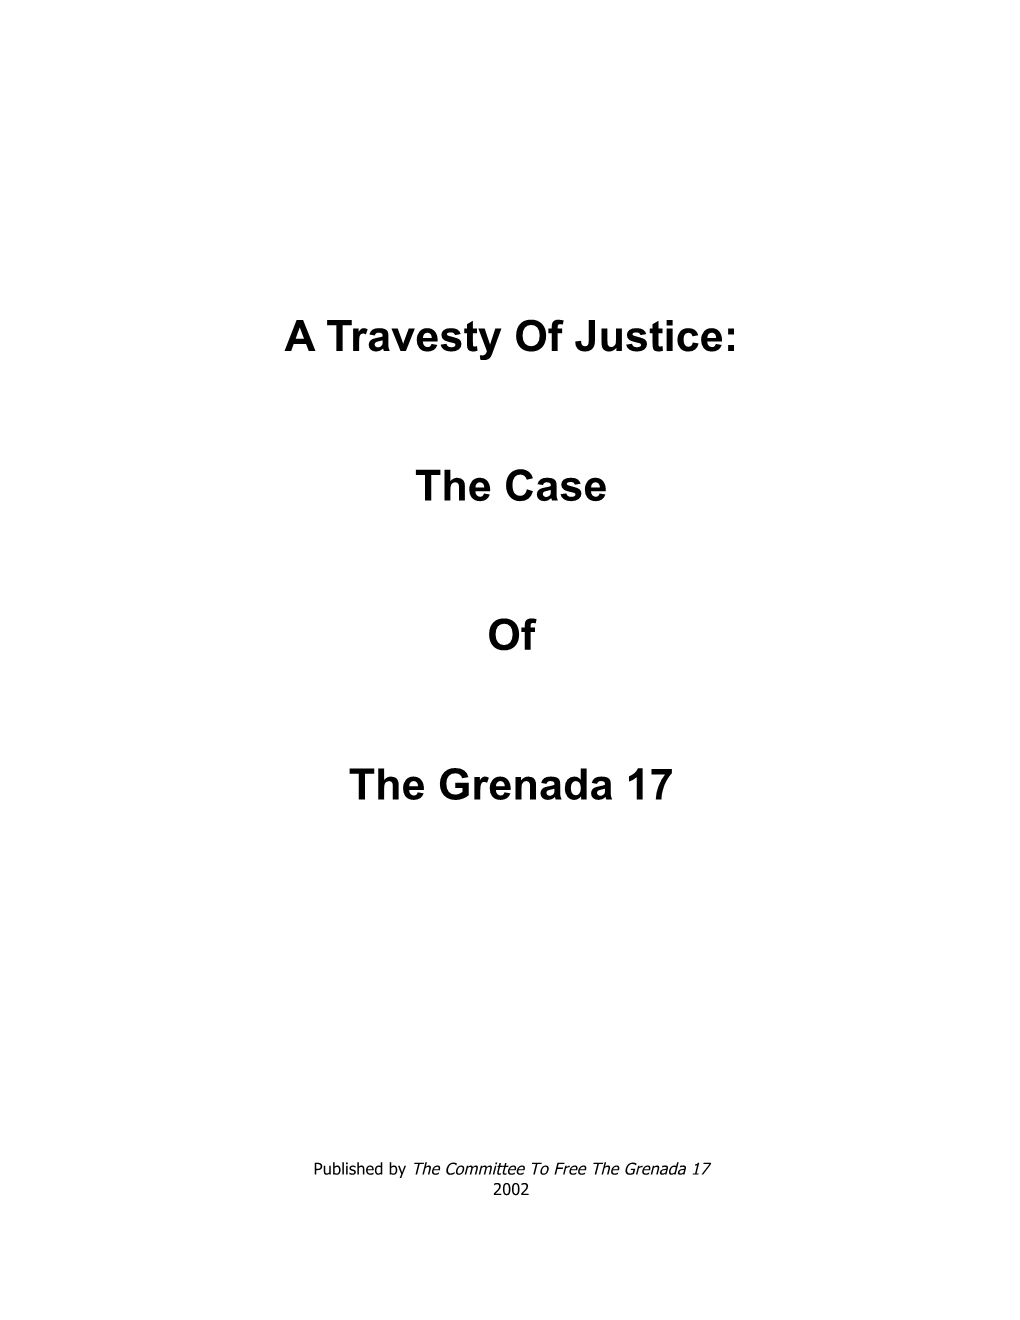 A Travesty of Justice: the Case of the Grenada 17